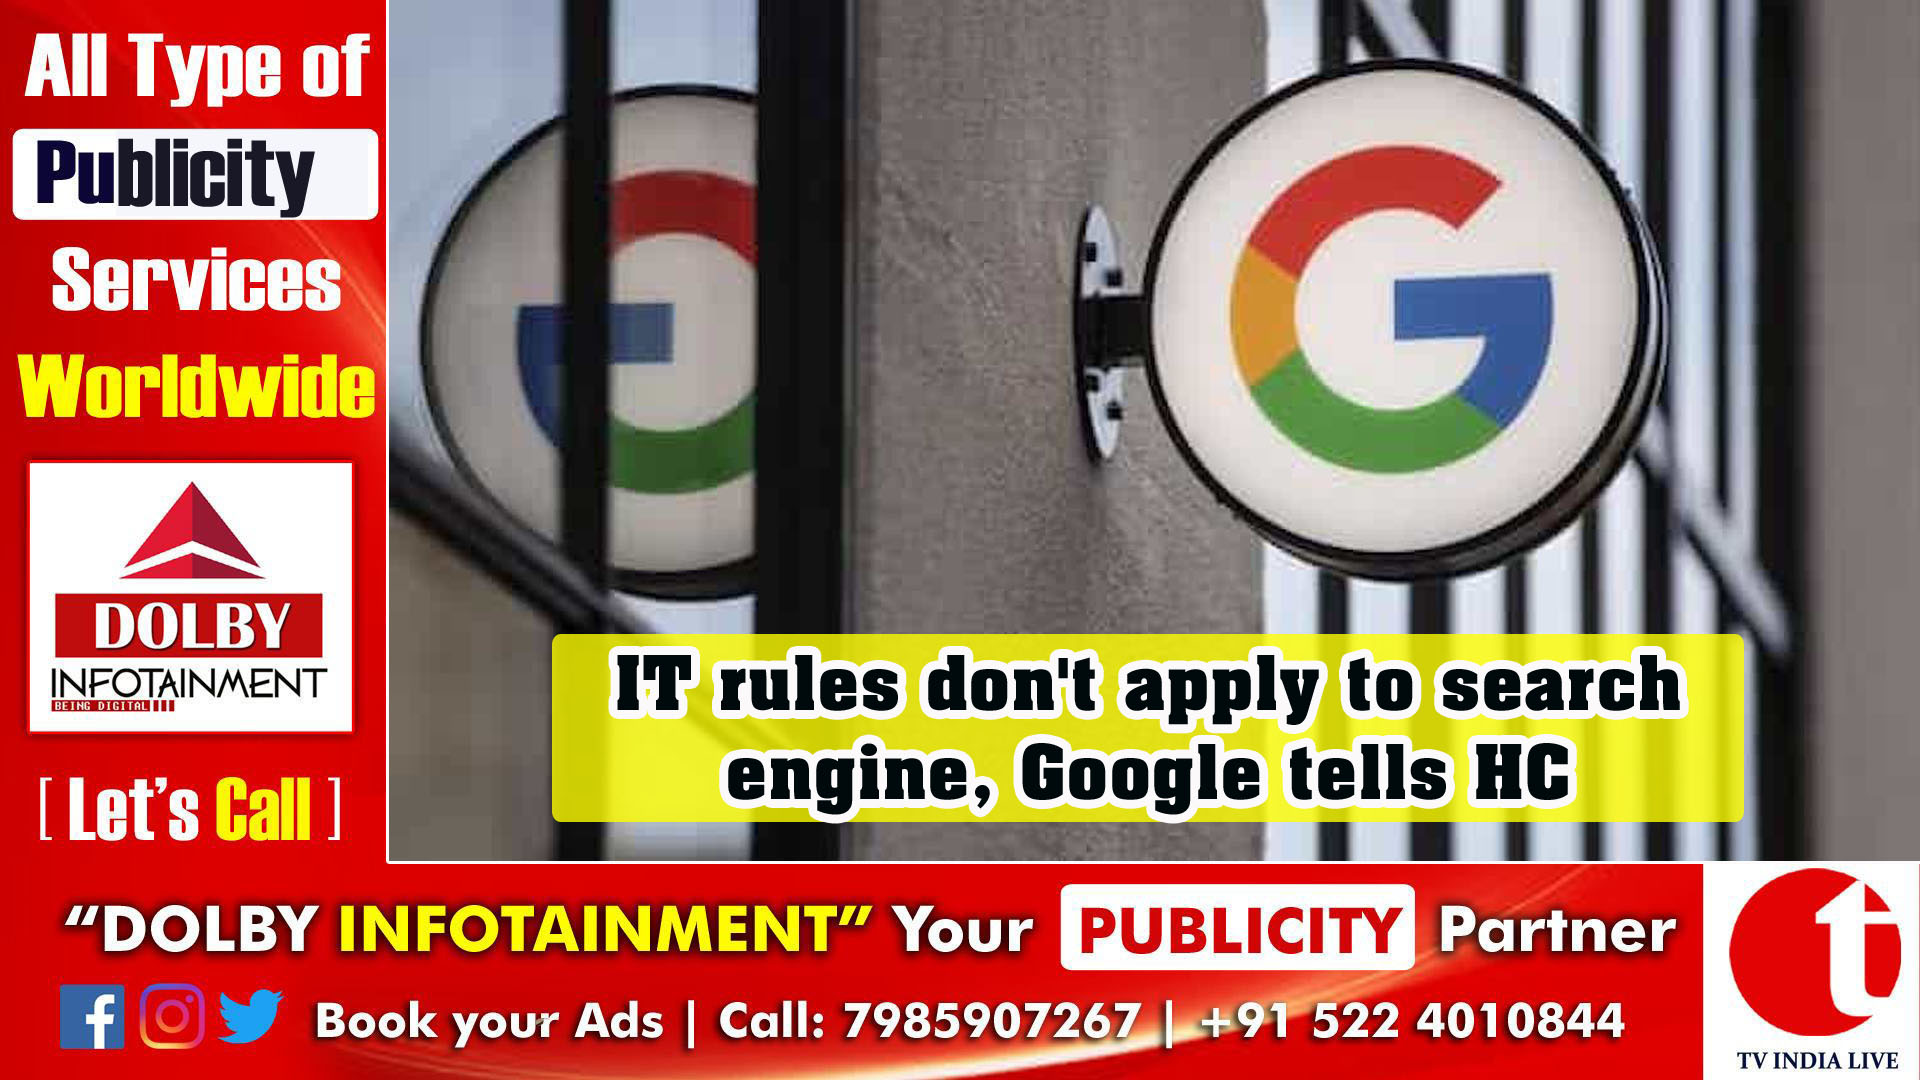 IT rules don't apply to search engine, Google tells HC